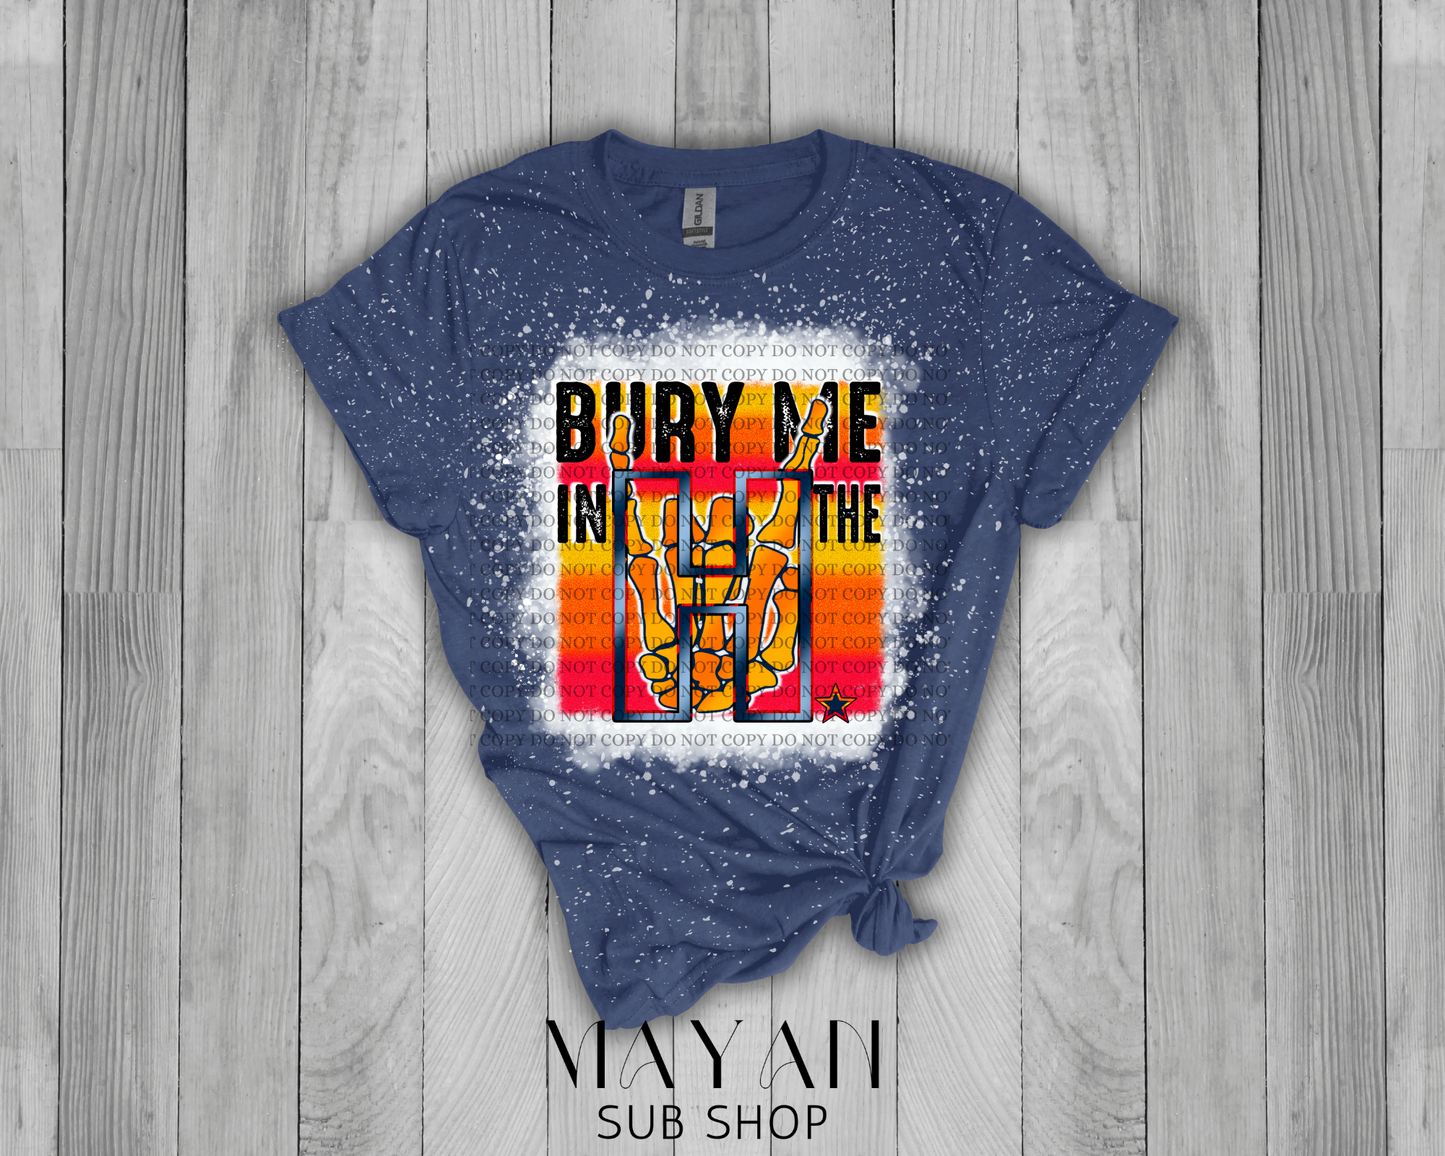 Bury me in the H in heather navy bleached shirt. - Mayan Sub Shop